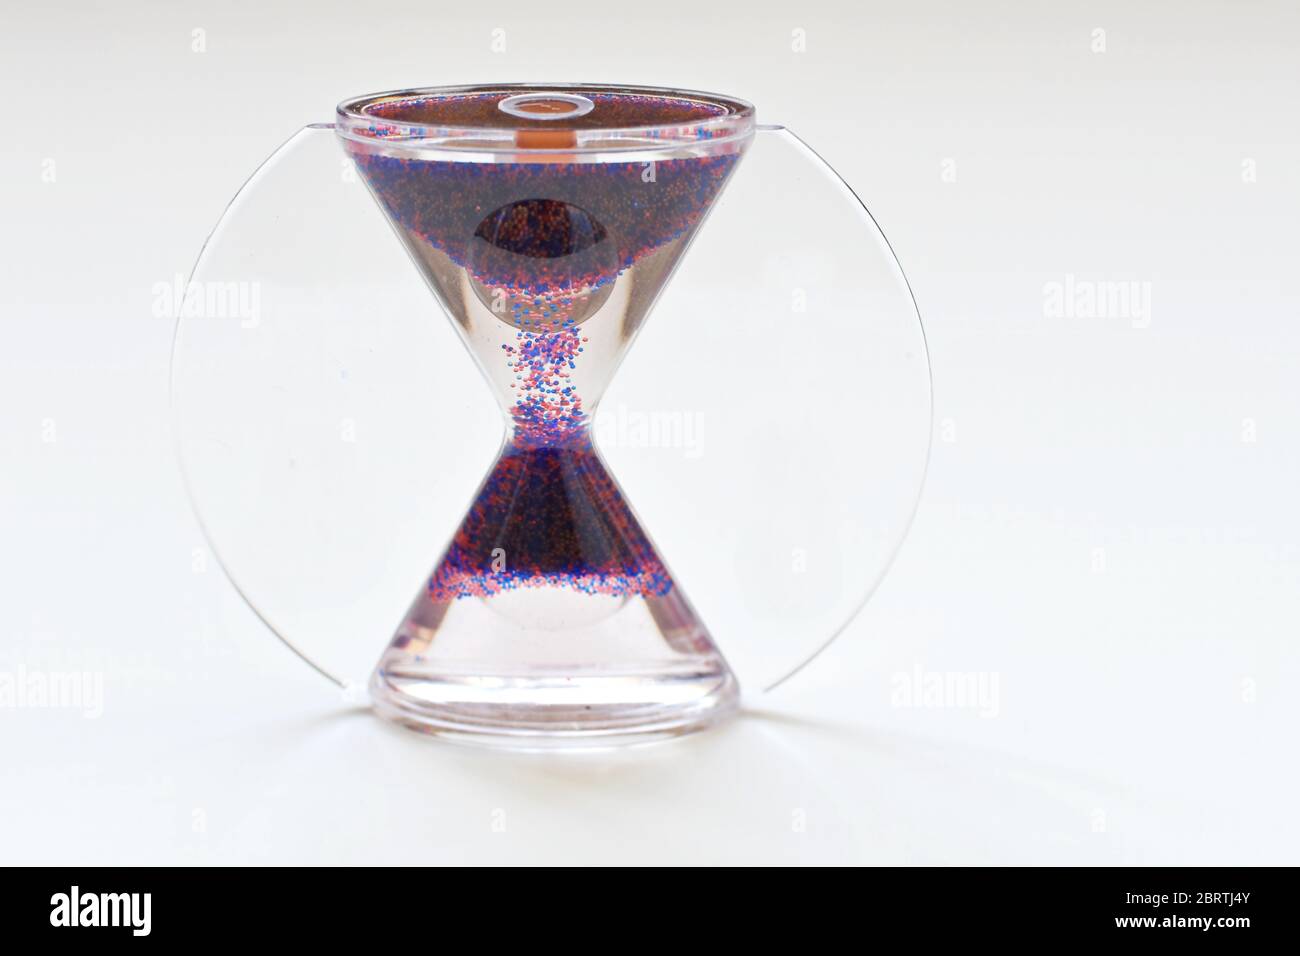 Front view of an hourglass (clepsydra, sand glass) on white background. Stock Photo